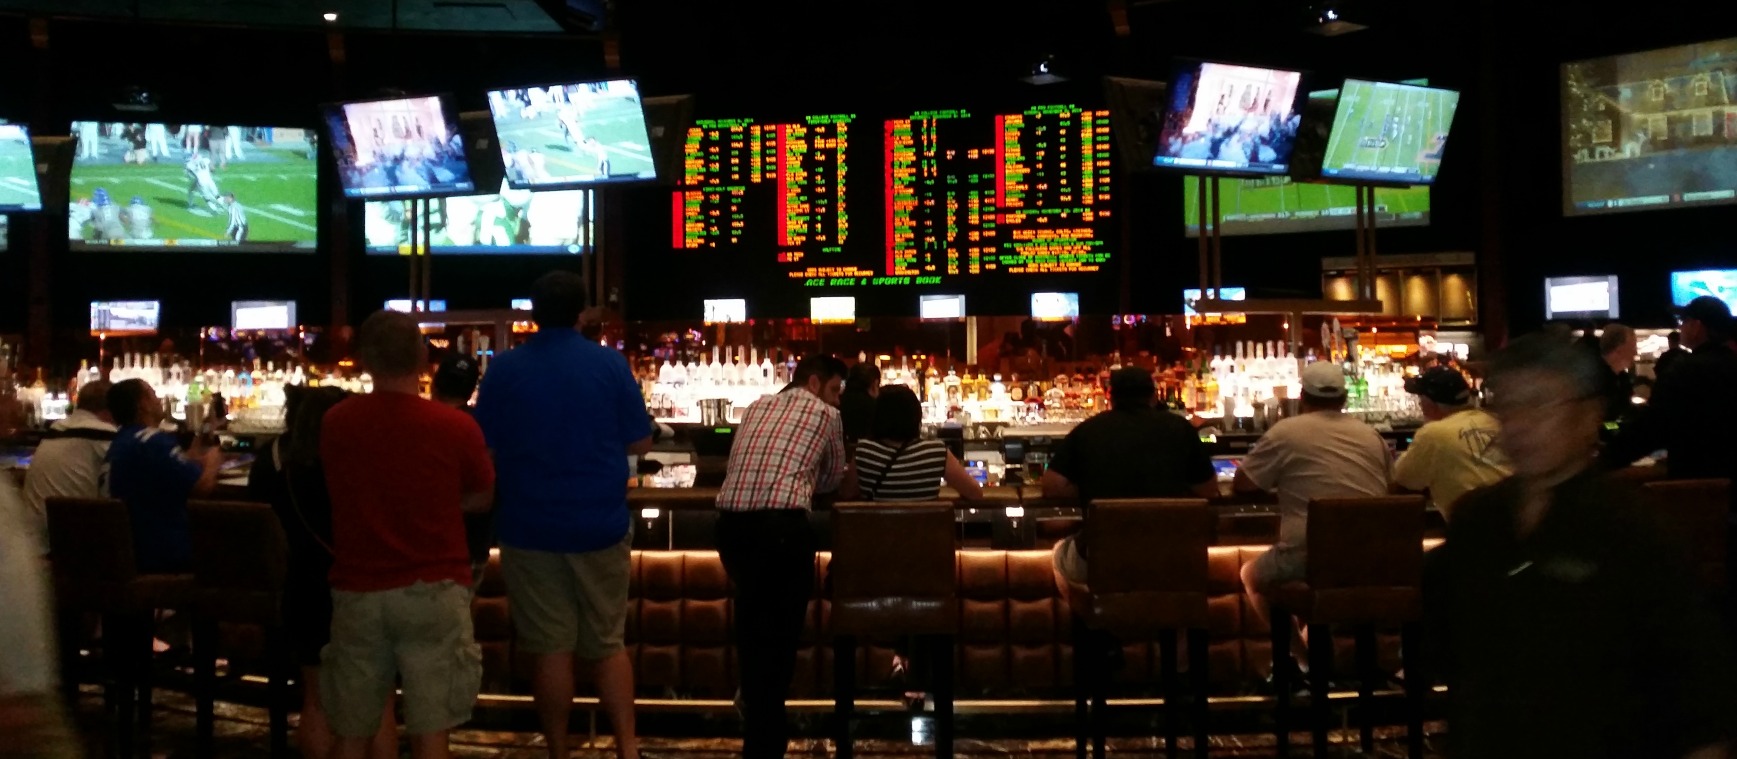 Video Poker at the Bar May Yield a Nice TV Screen for Watching Hoops  and Some Free Drinks  Pictured: Caesars Palace Sports Book Bar